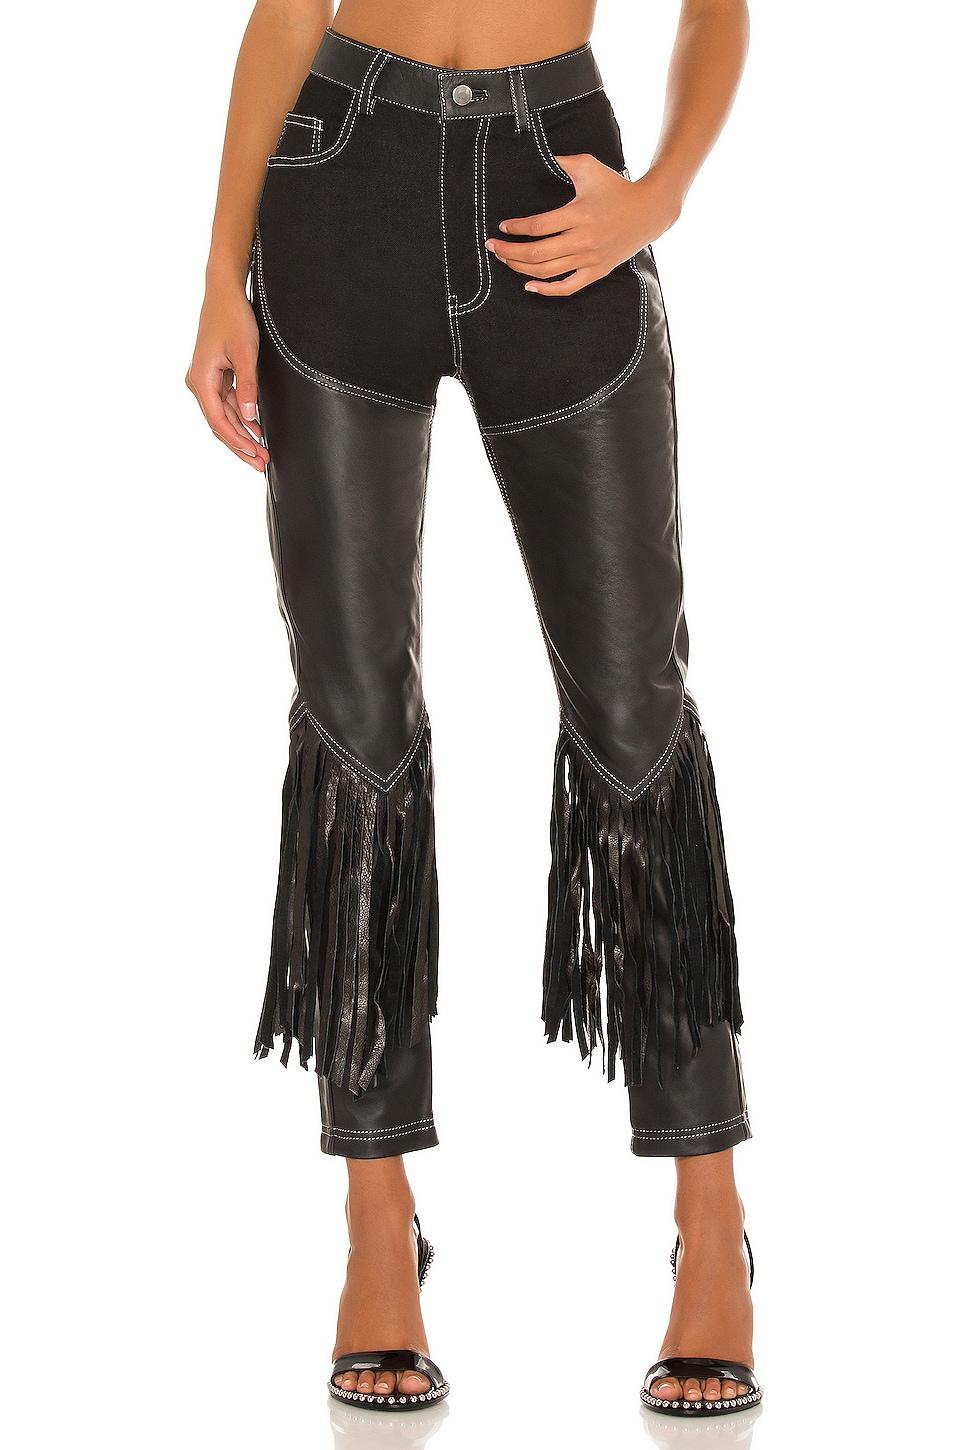 Urban Outfitters Cowboy Chaps Pants in Black | Lyst UK